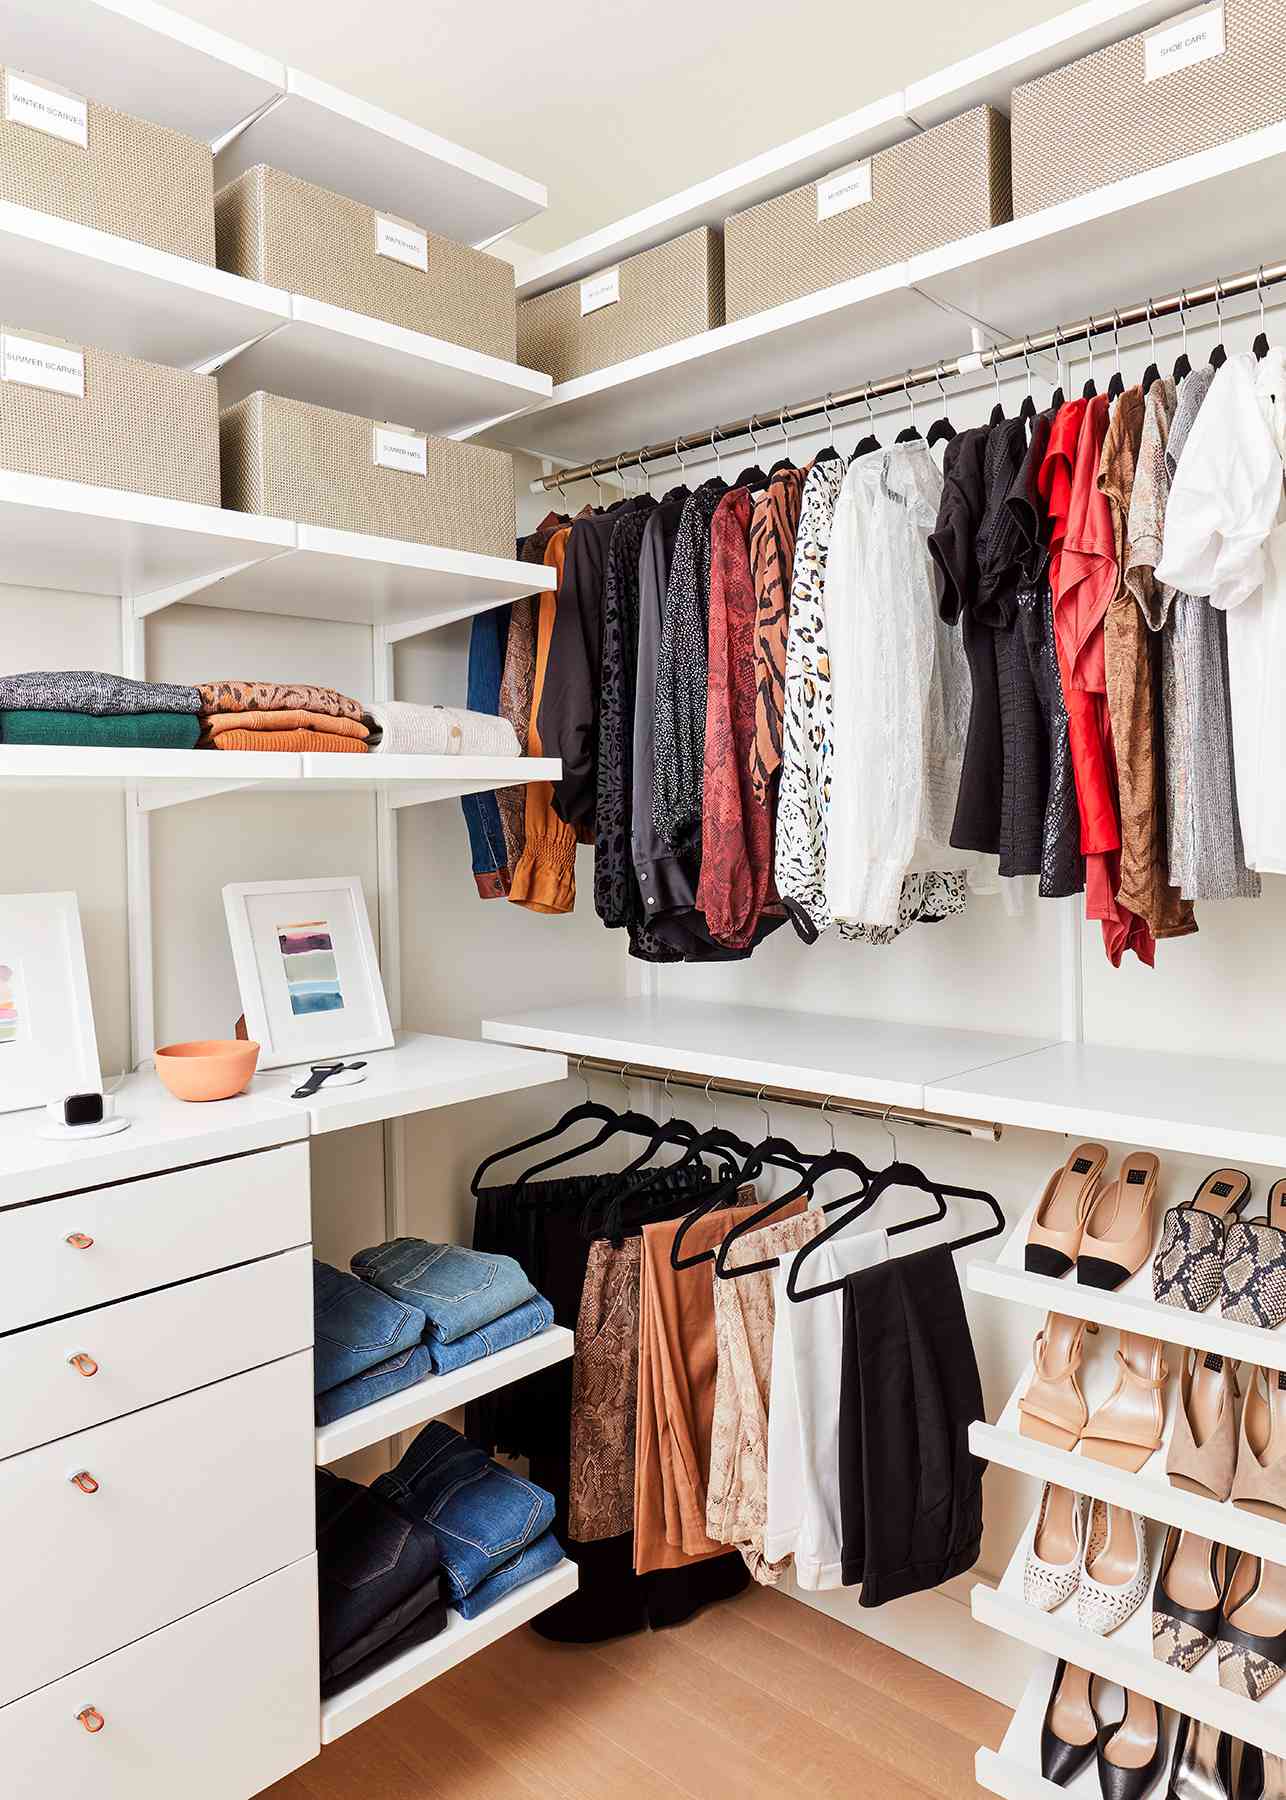 Closet For Maximum Storage, Bedroom Wall Shelves For Clothes